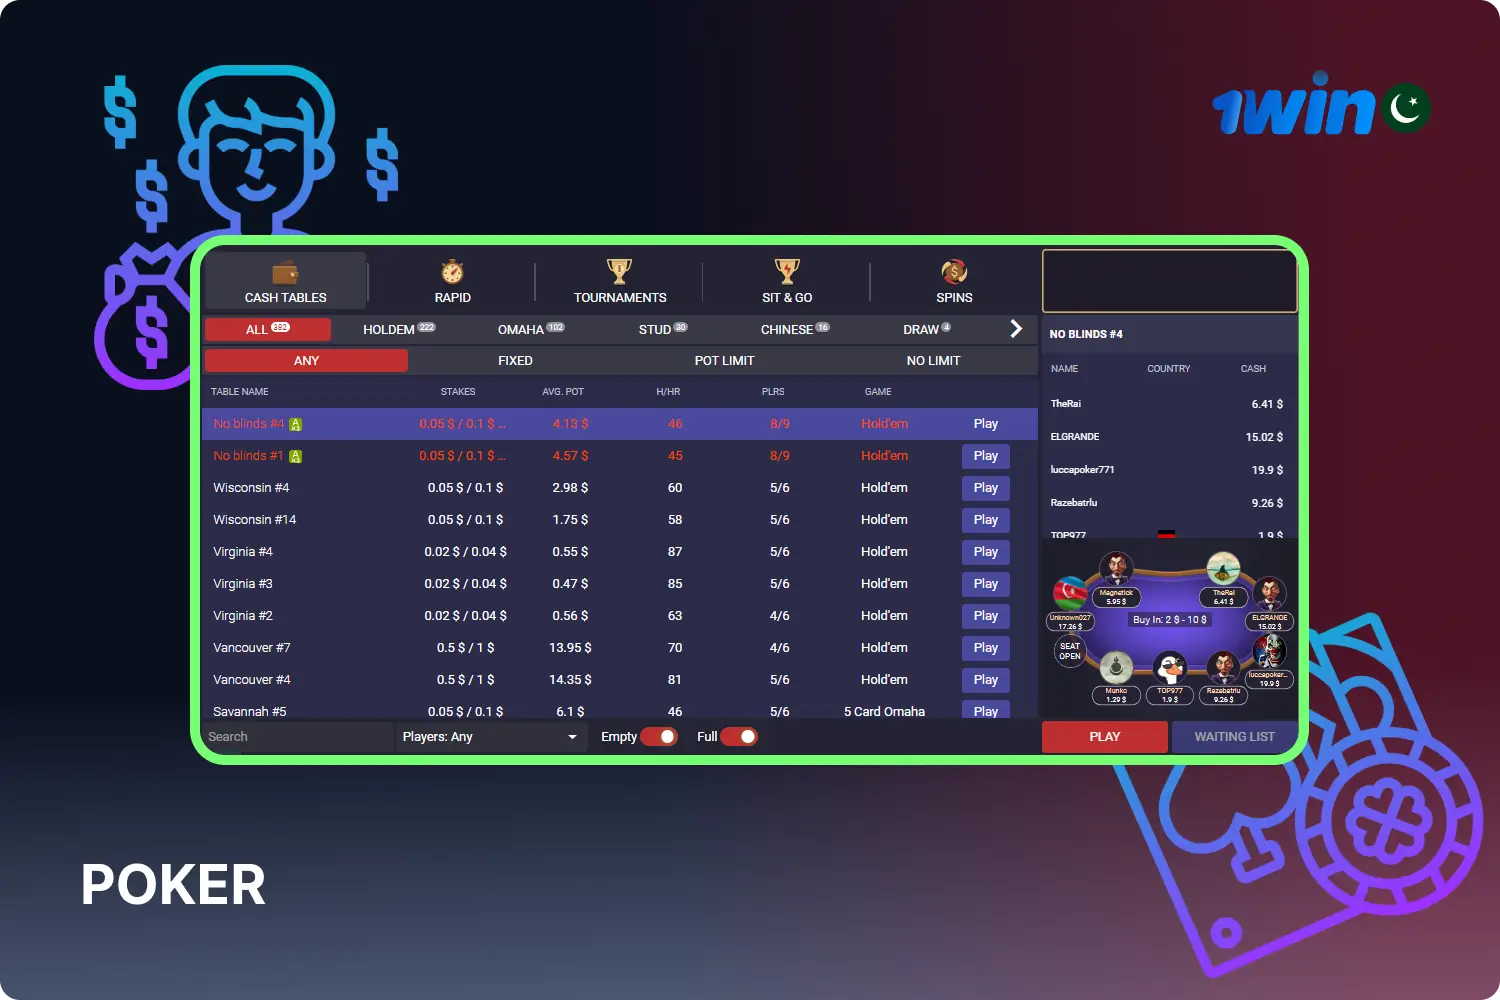 1win Casino provides its users in Pakistan with a variety of poker games to suit all tastes